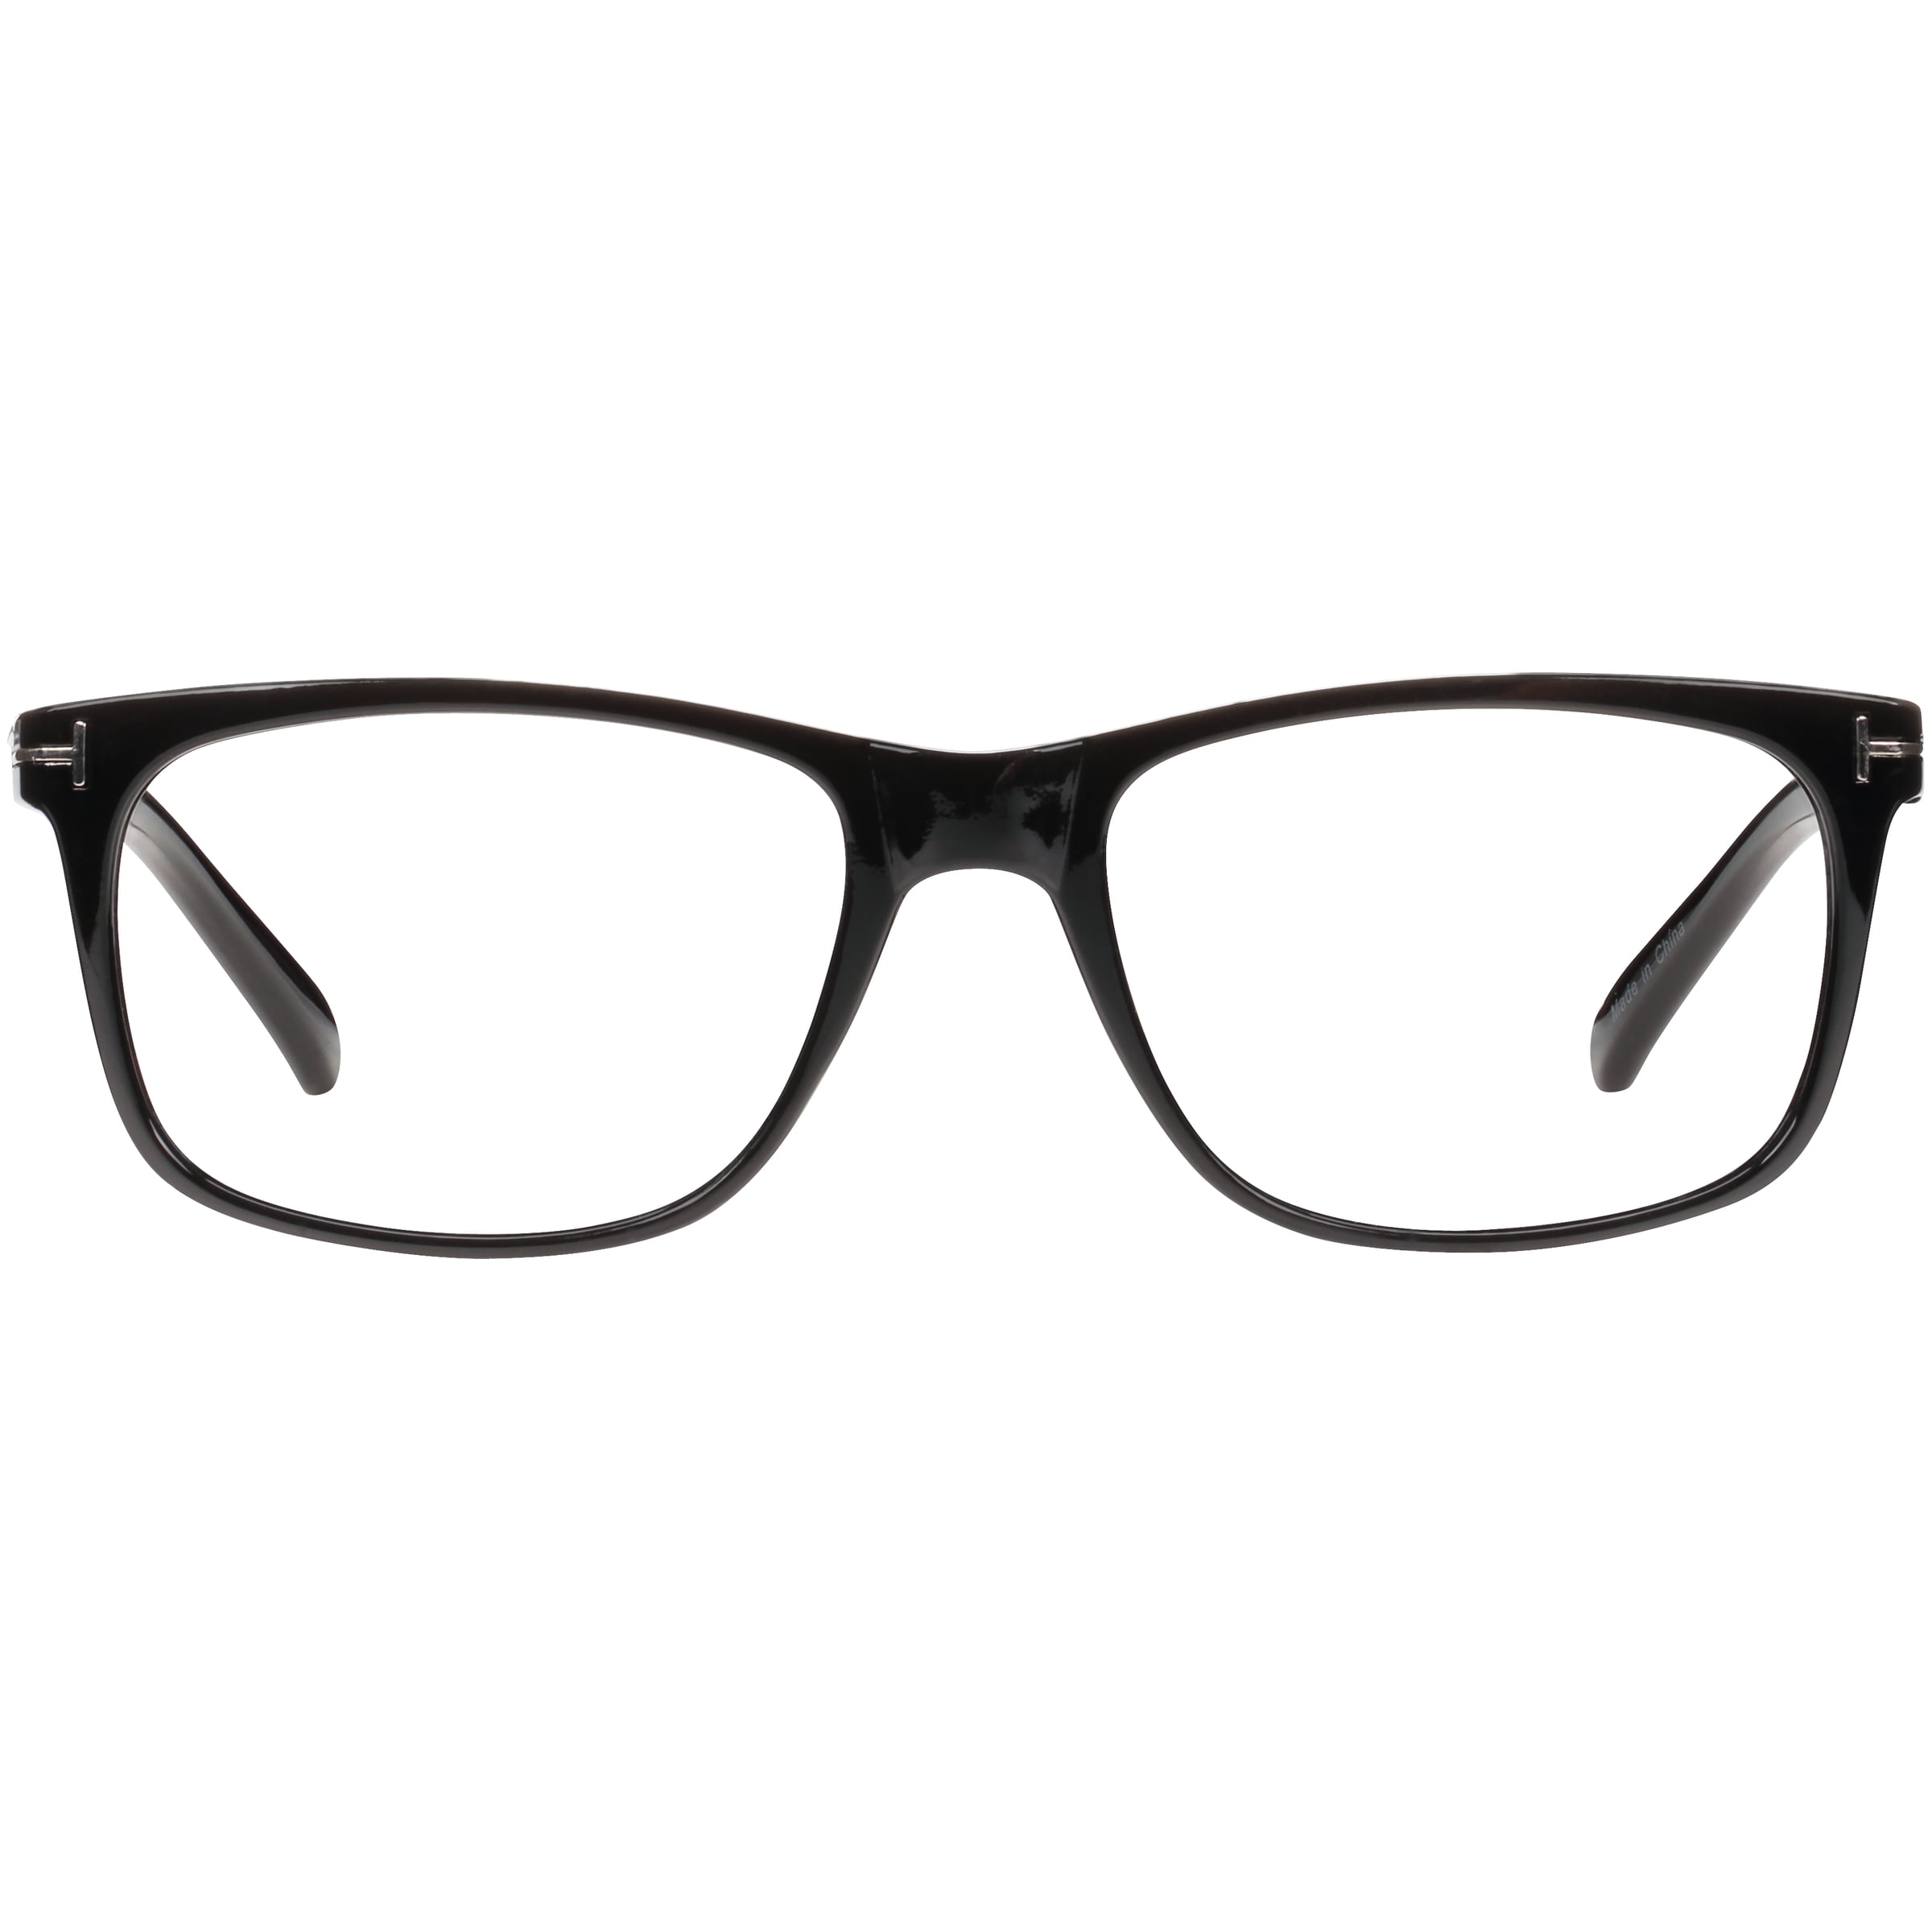 M+ Readers Darkens in the Sun Issac Black +1.50 Reading Glasses with ...